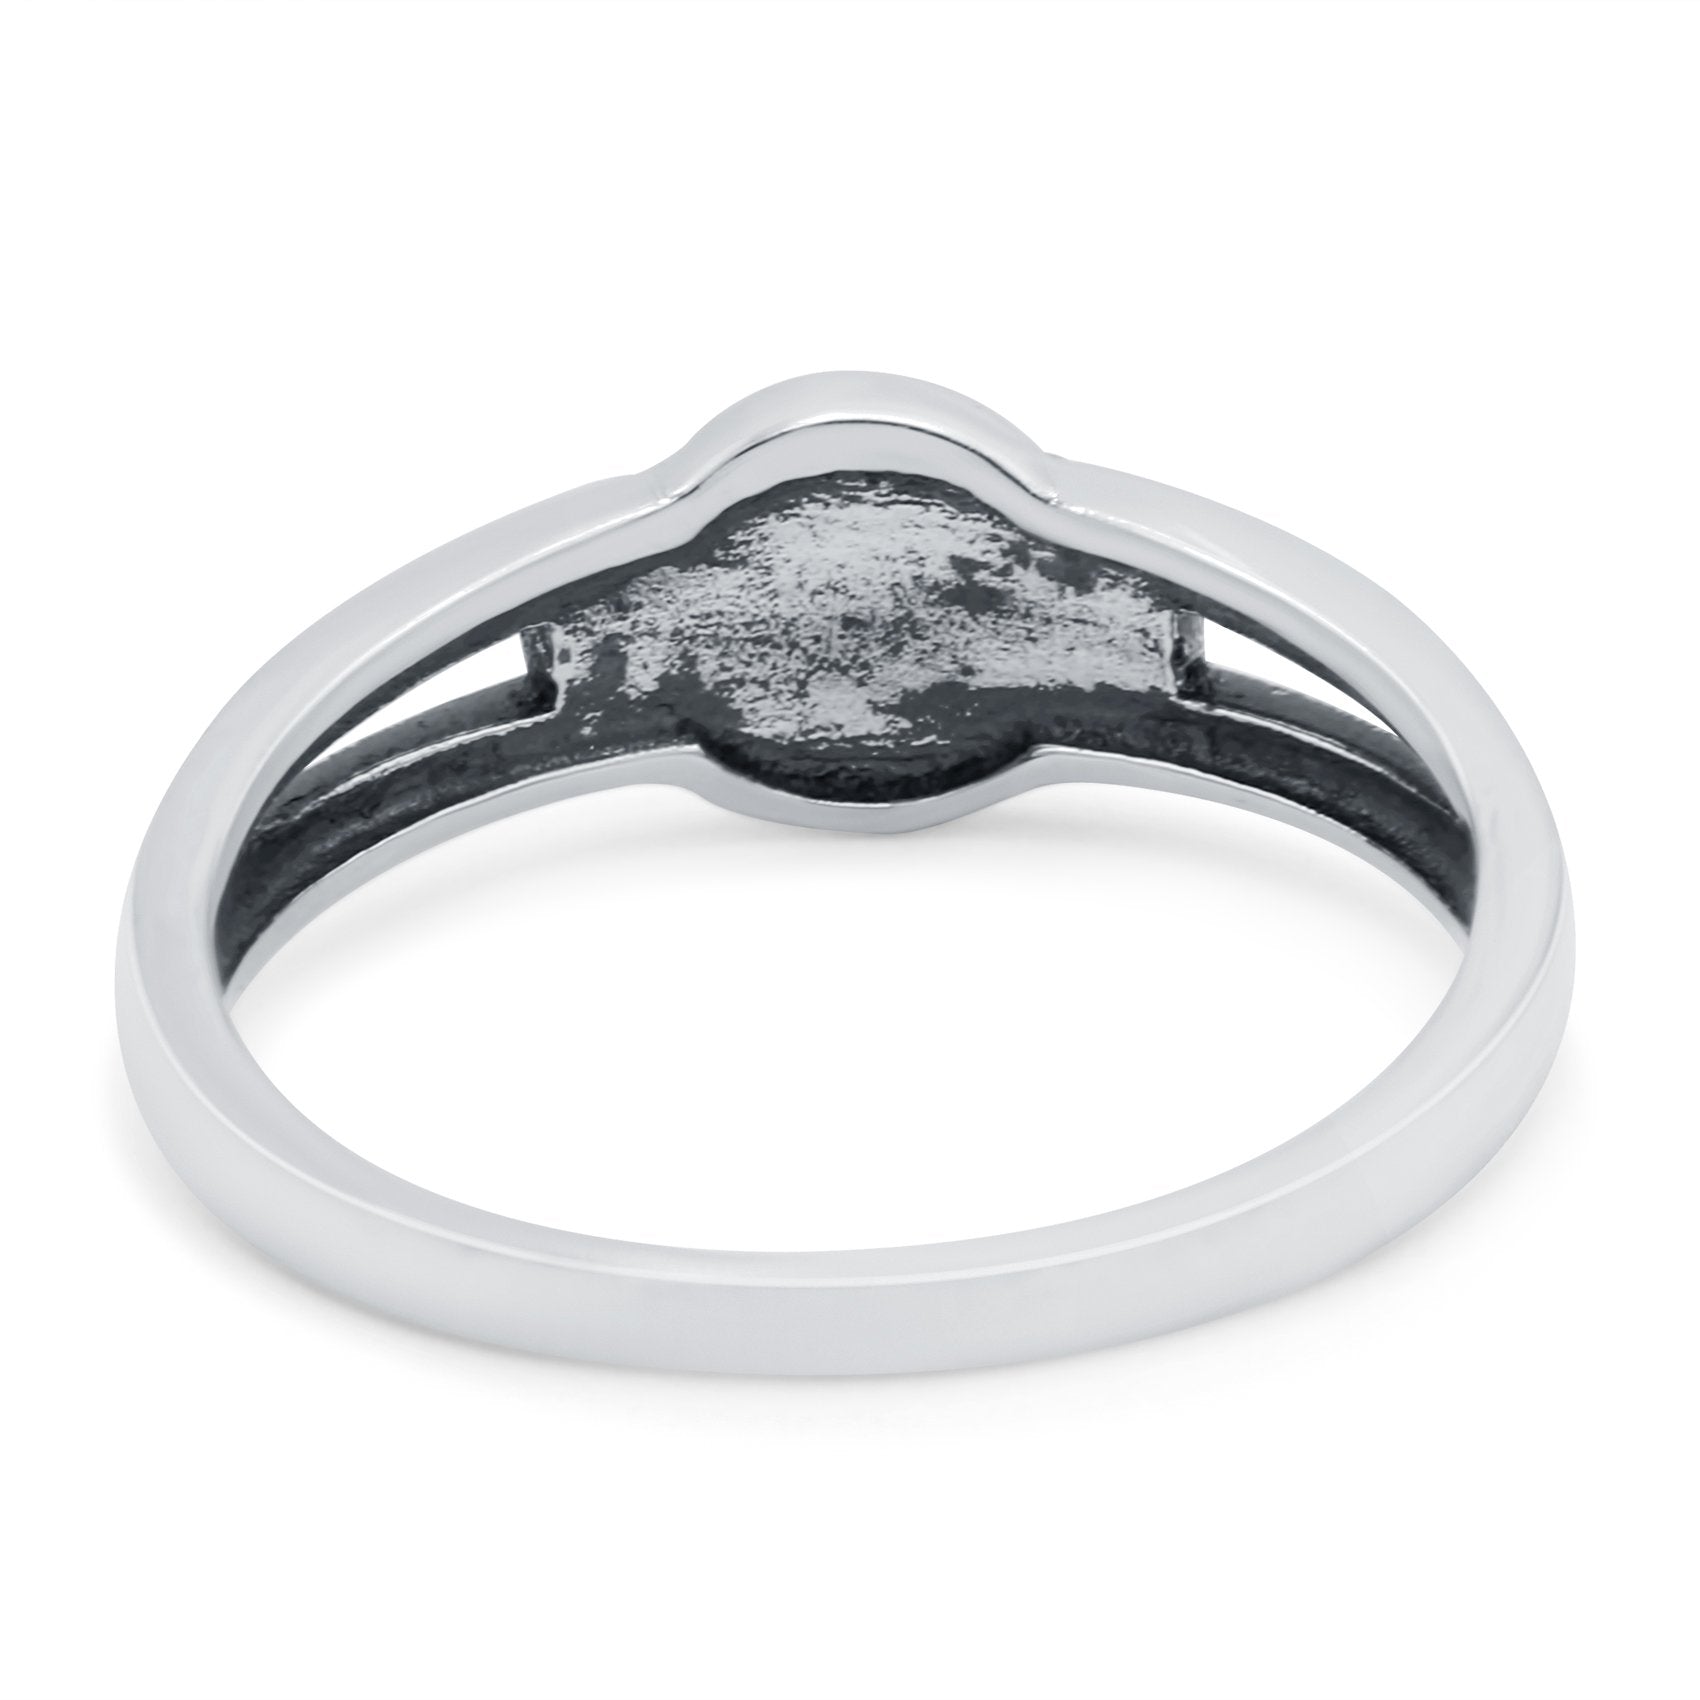 Smiling Sun Ring Oxidized Band Solid 925 Sterling Silver Thumb Ring (7mm)